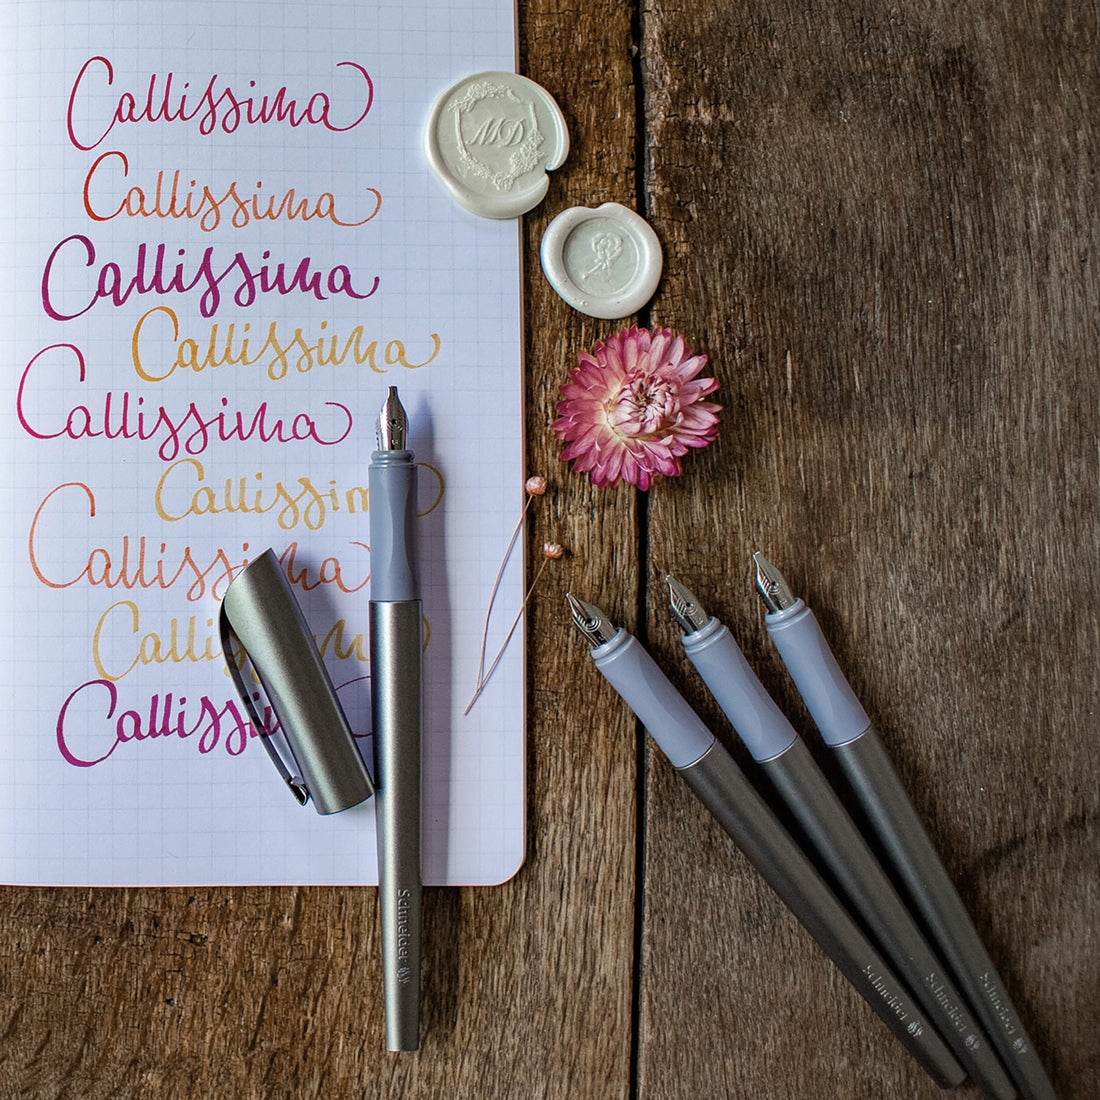 Callissima Calligraphy Set - Anthracite Fountain Pen & Ice Blue Ink